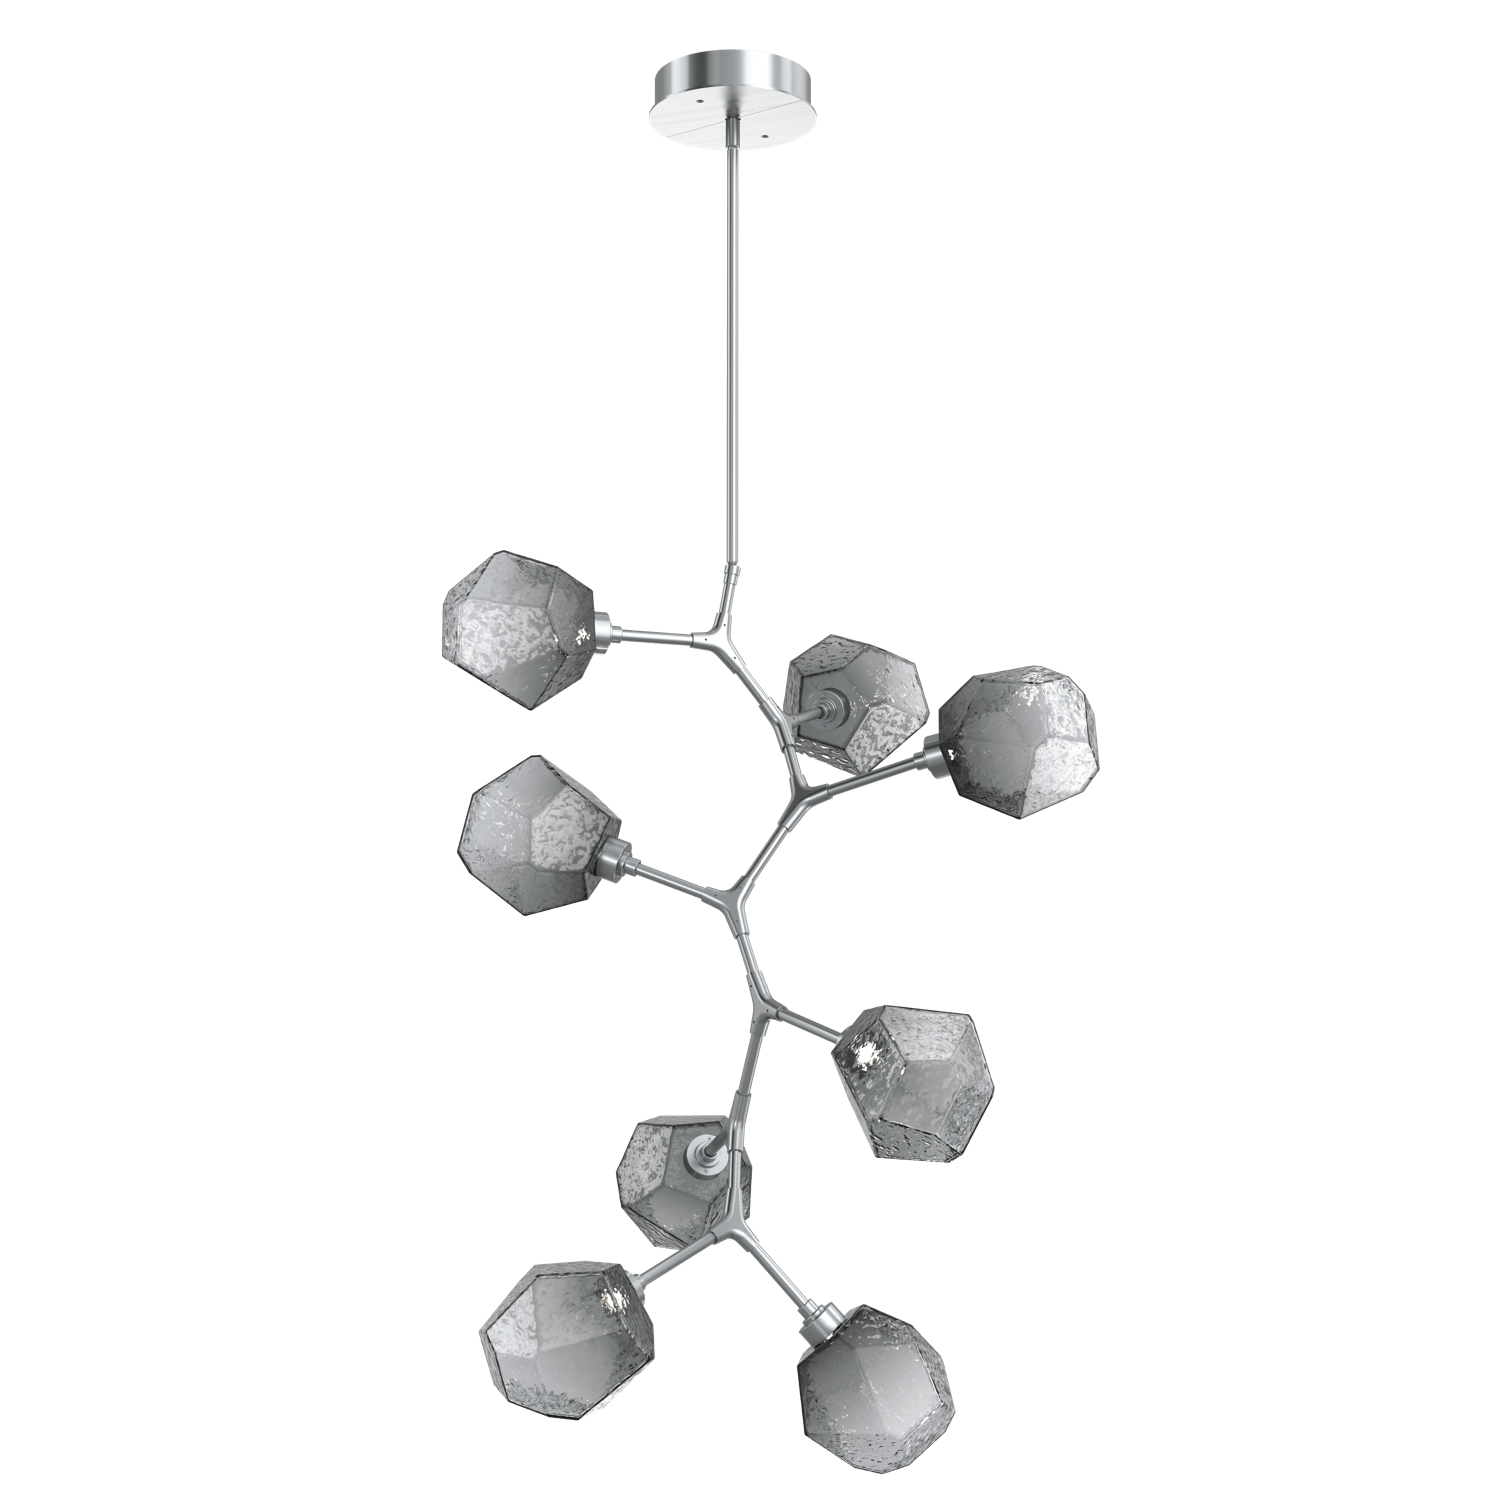 CHB0039-VB-SN-S-Hammerton-Studio-Gem-8-light-modern-vine-chandelier-with-satin-nickel-finish-and-smoke-blown-glass-shades-and-LED-lamping